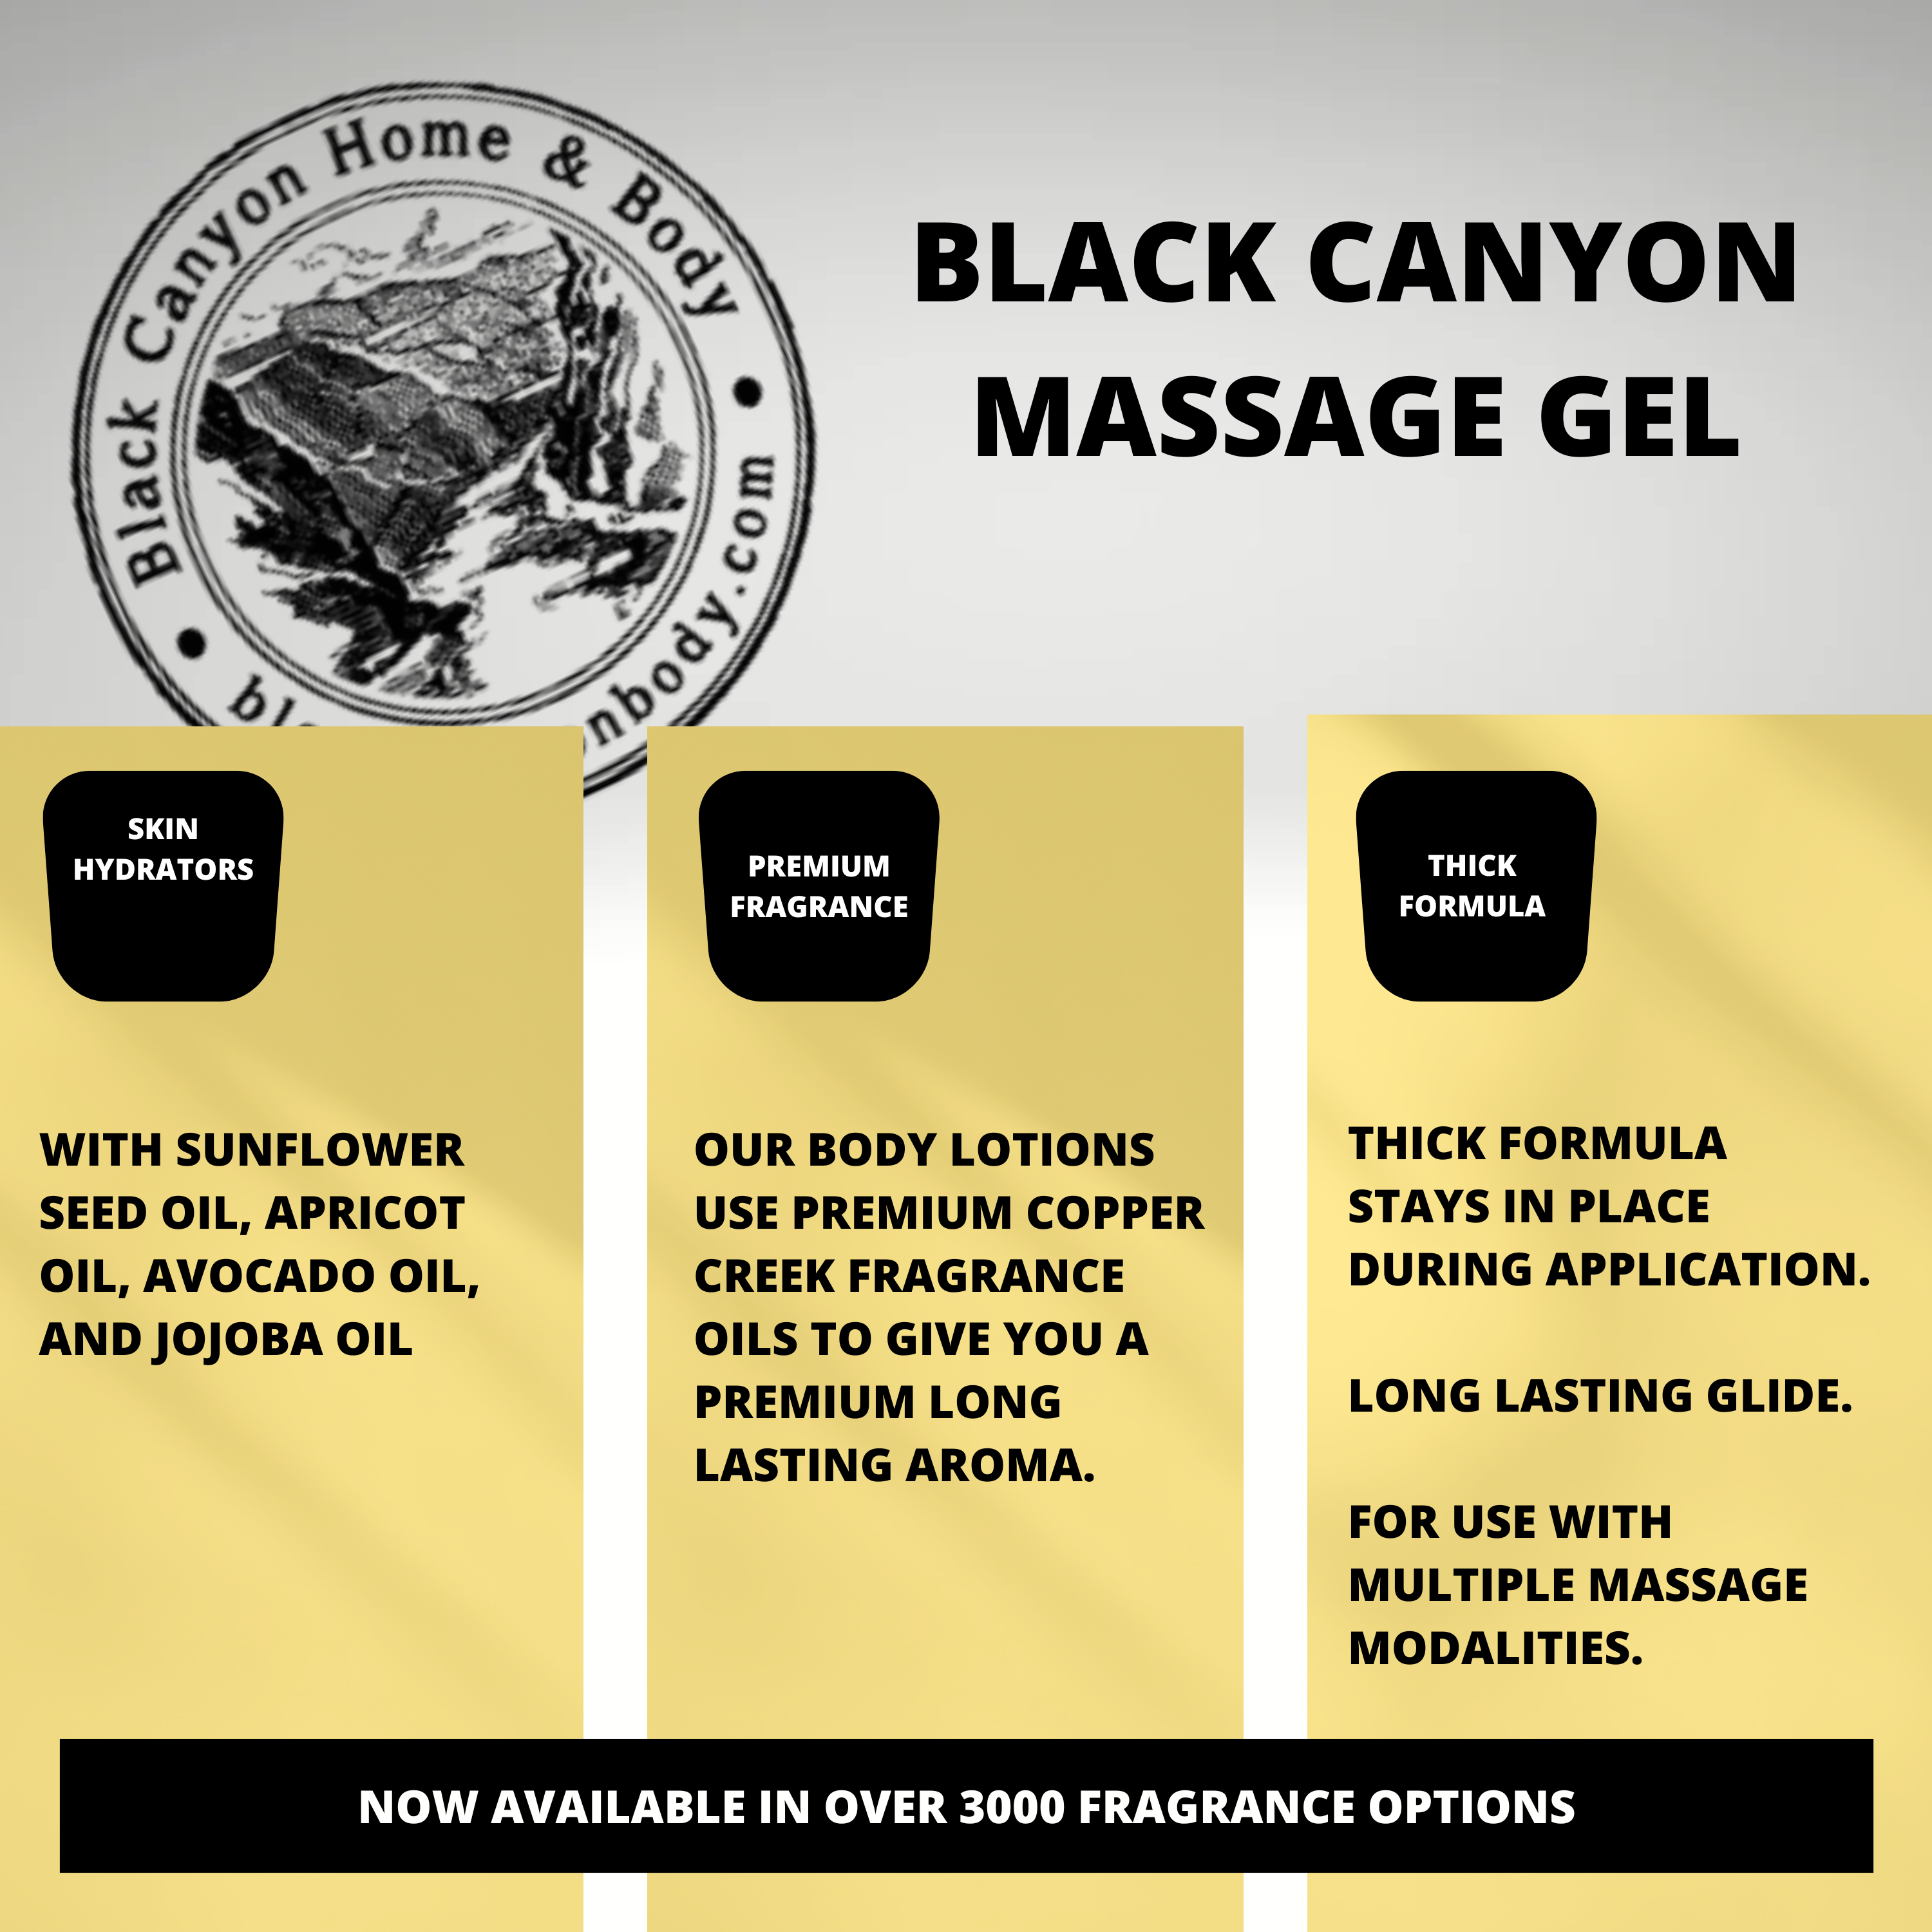 Black Canyon Green Apple & Pear Scented Massage Gel